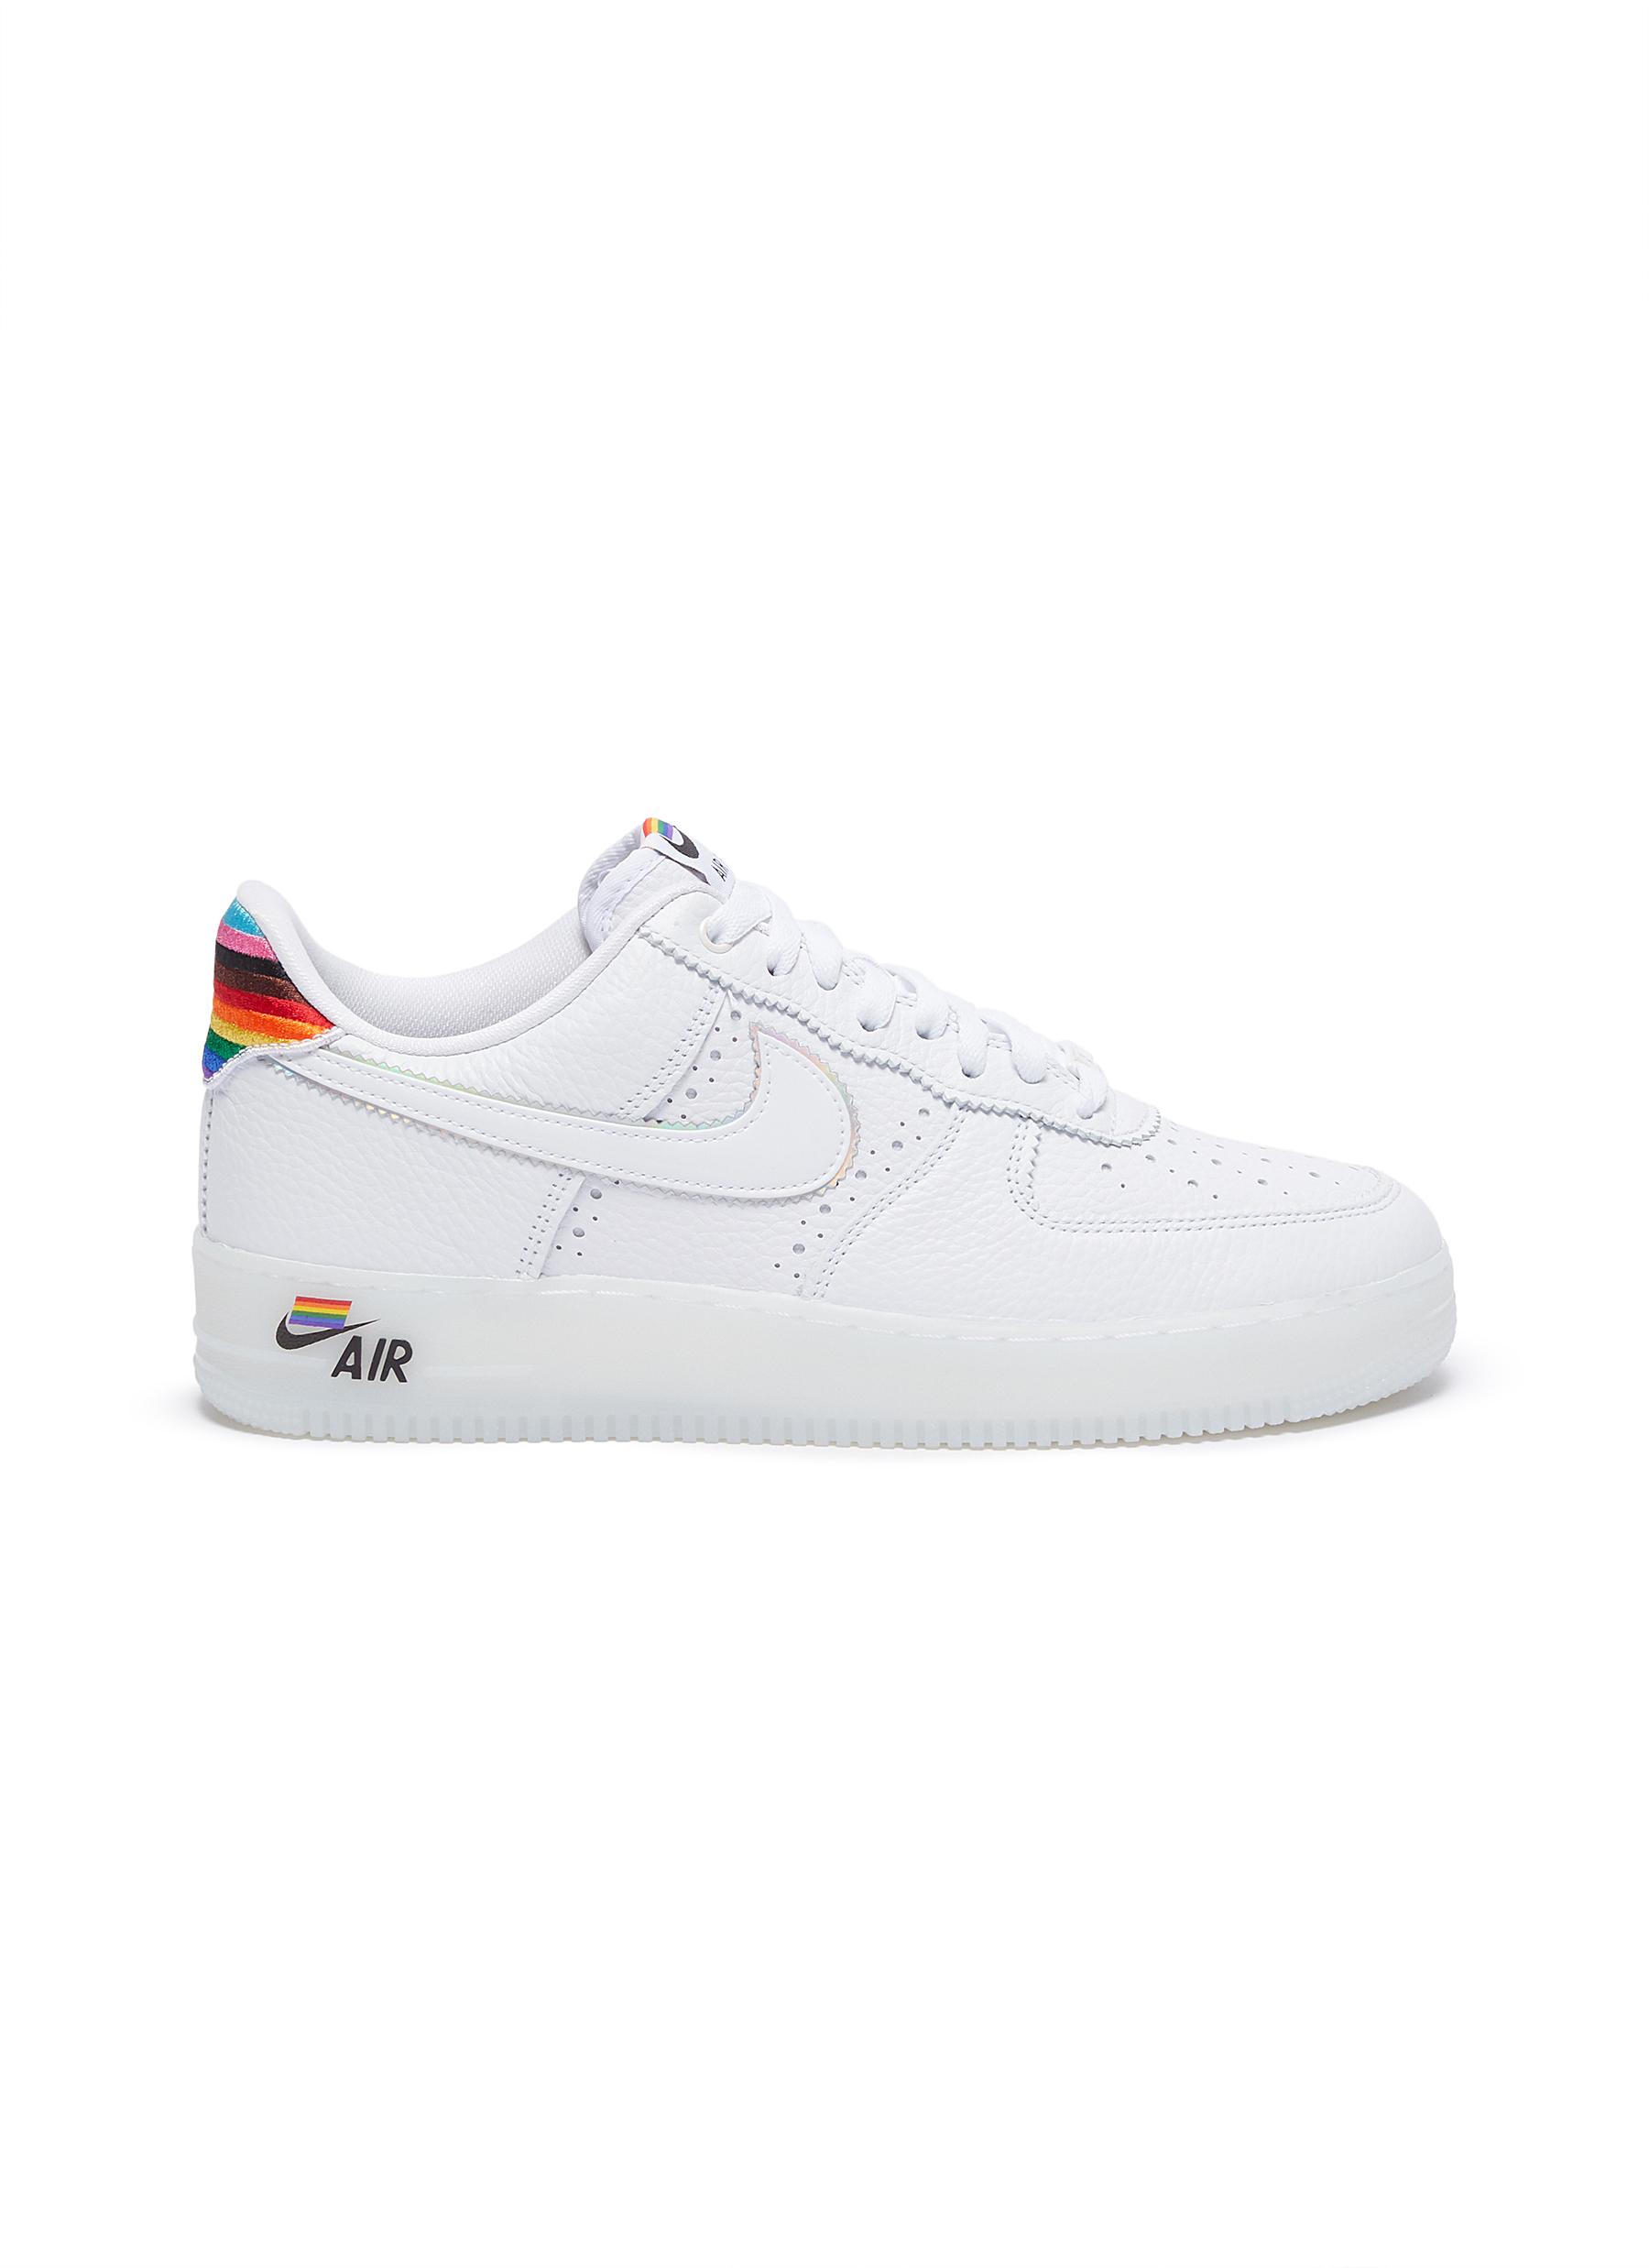 nike air force next day delivery